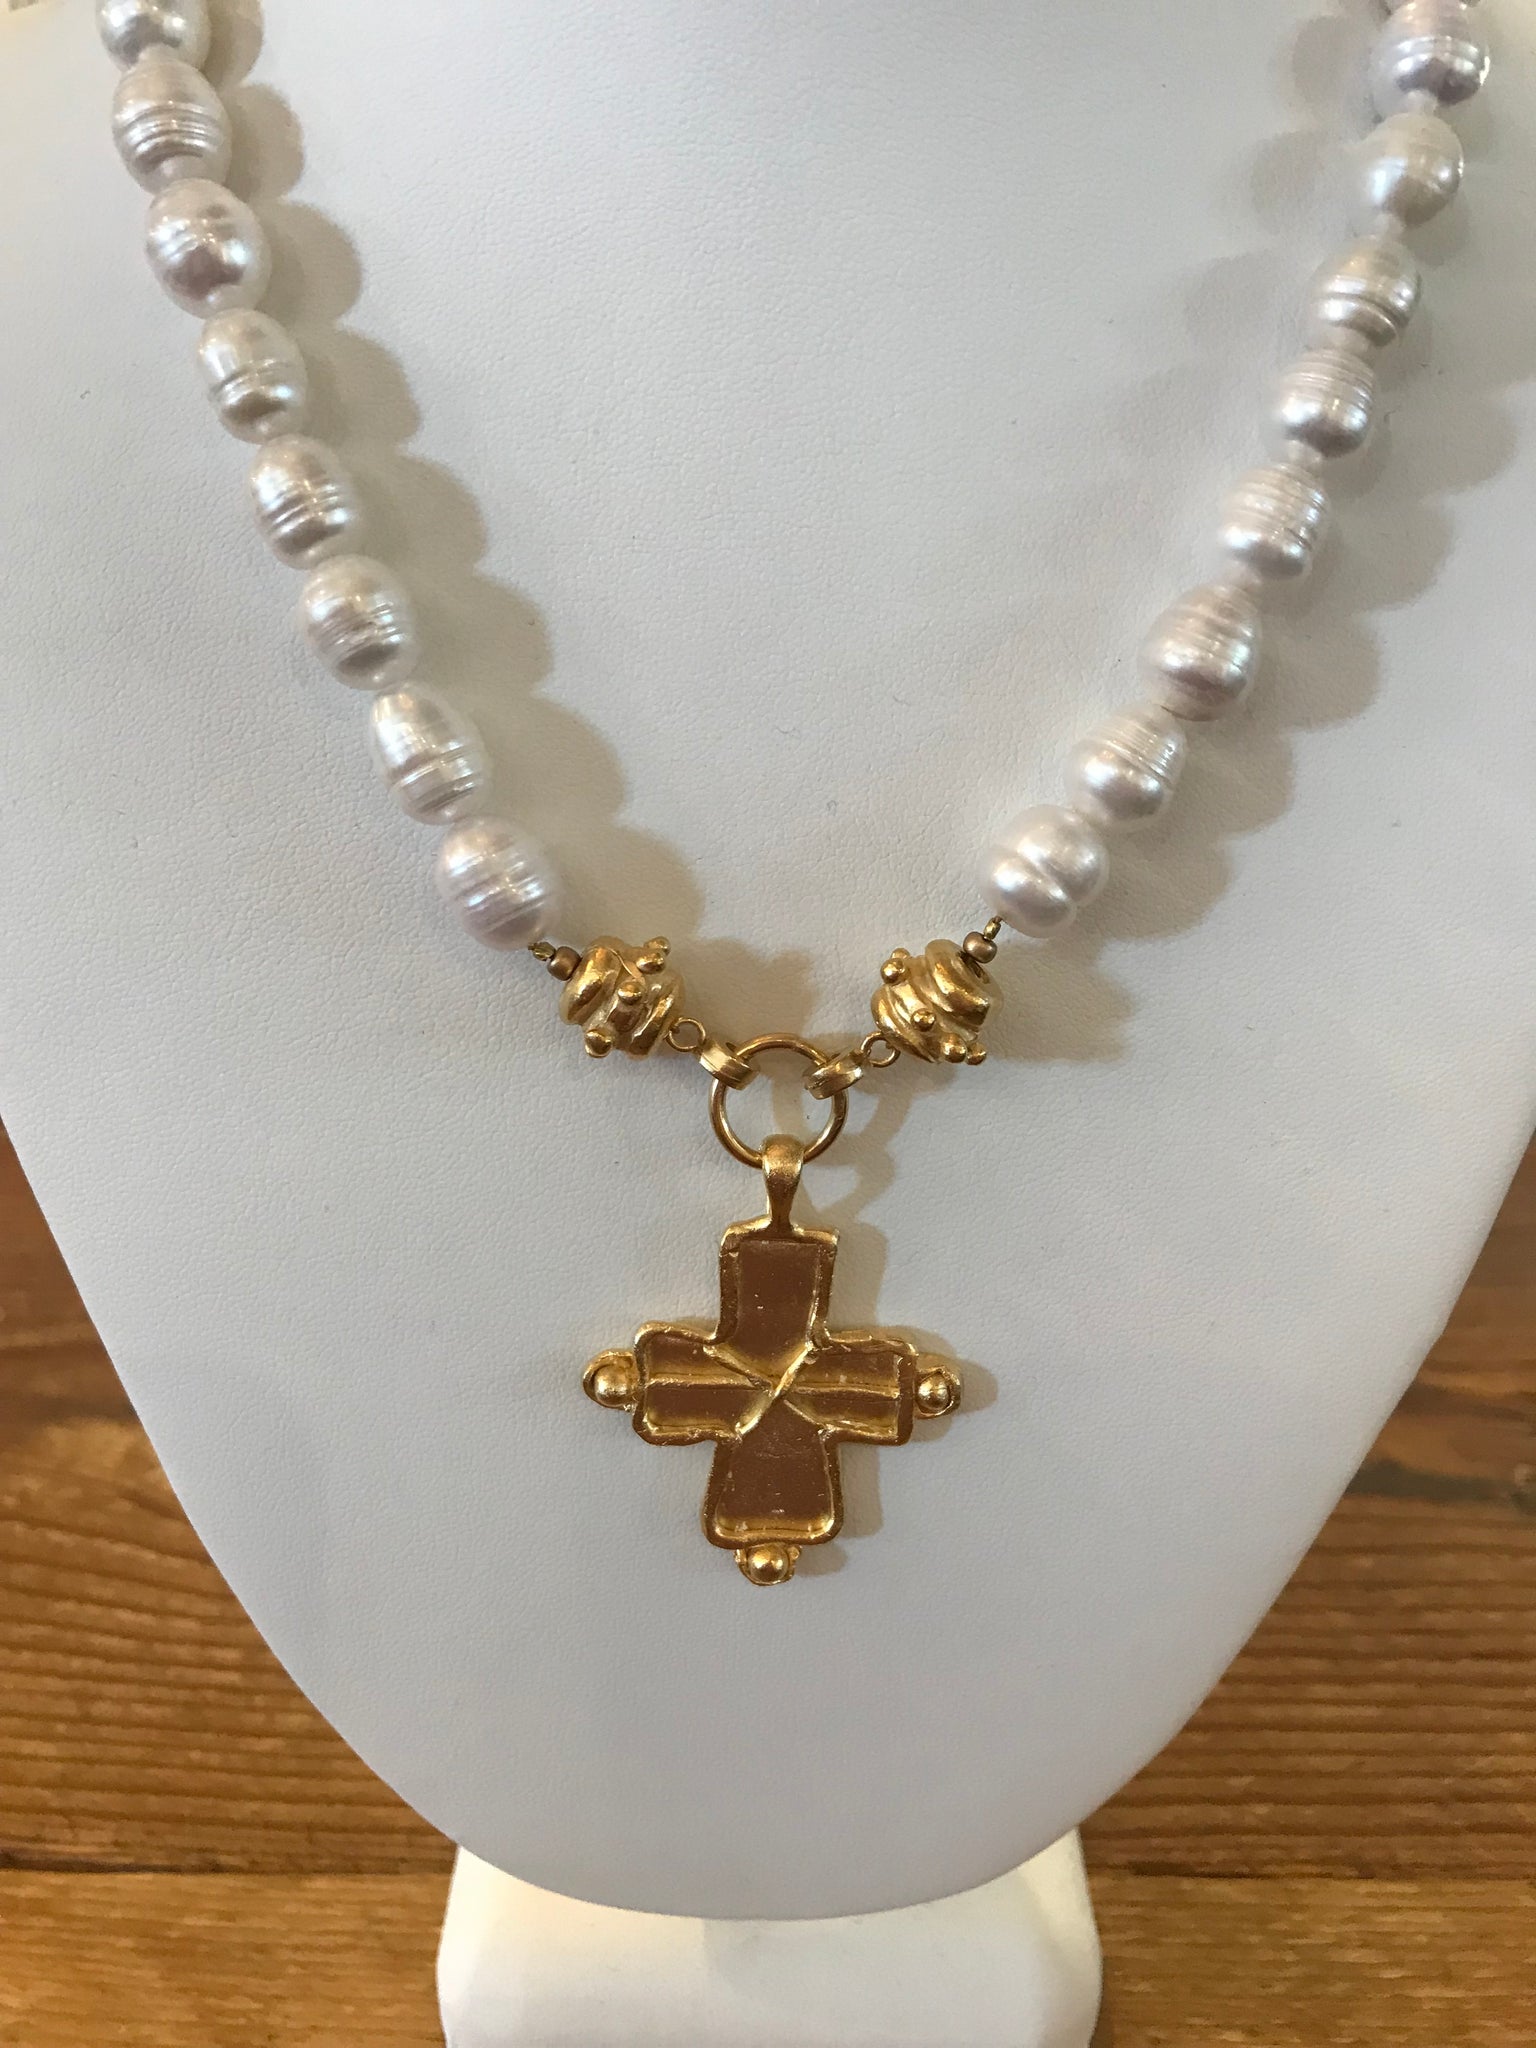 Susan Shaw 3913 Handcast Cross on Pearl Necklace